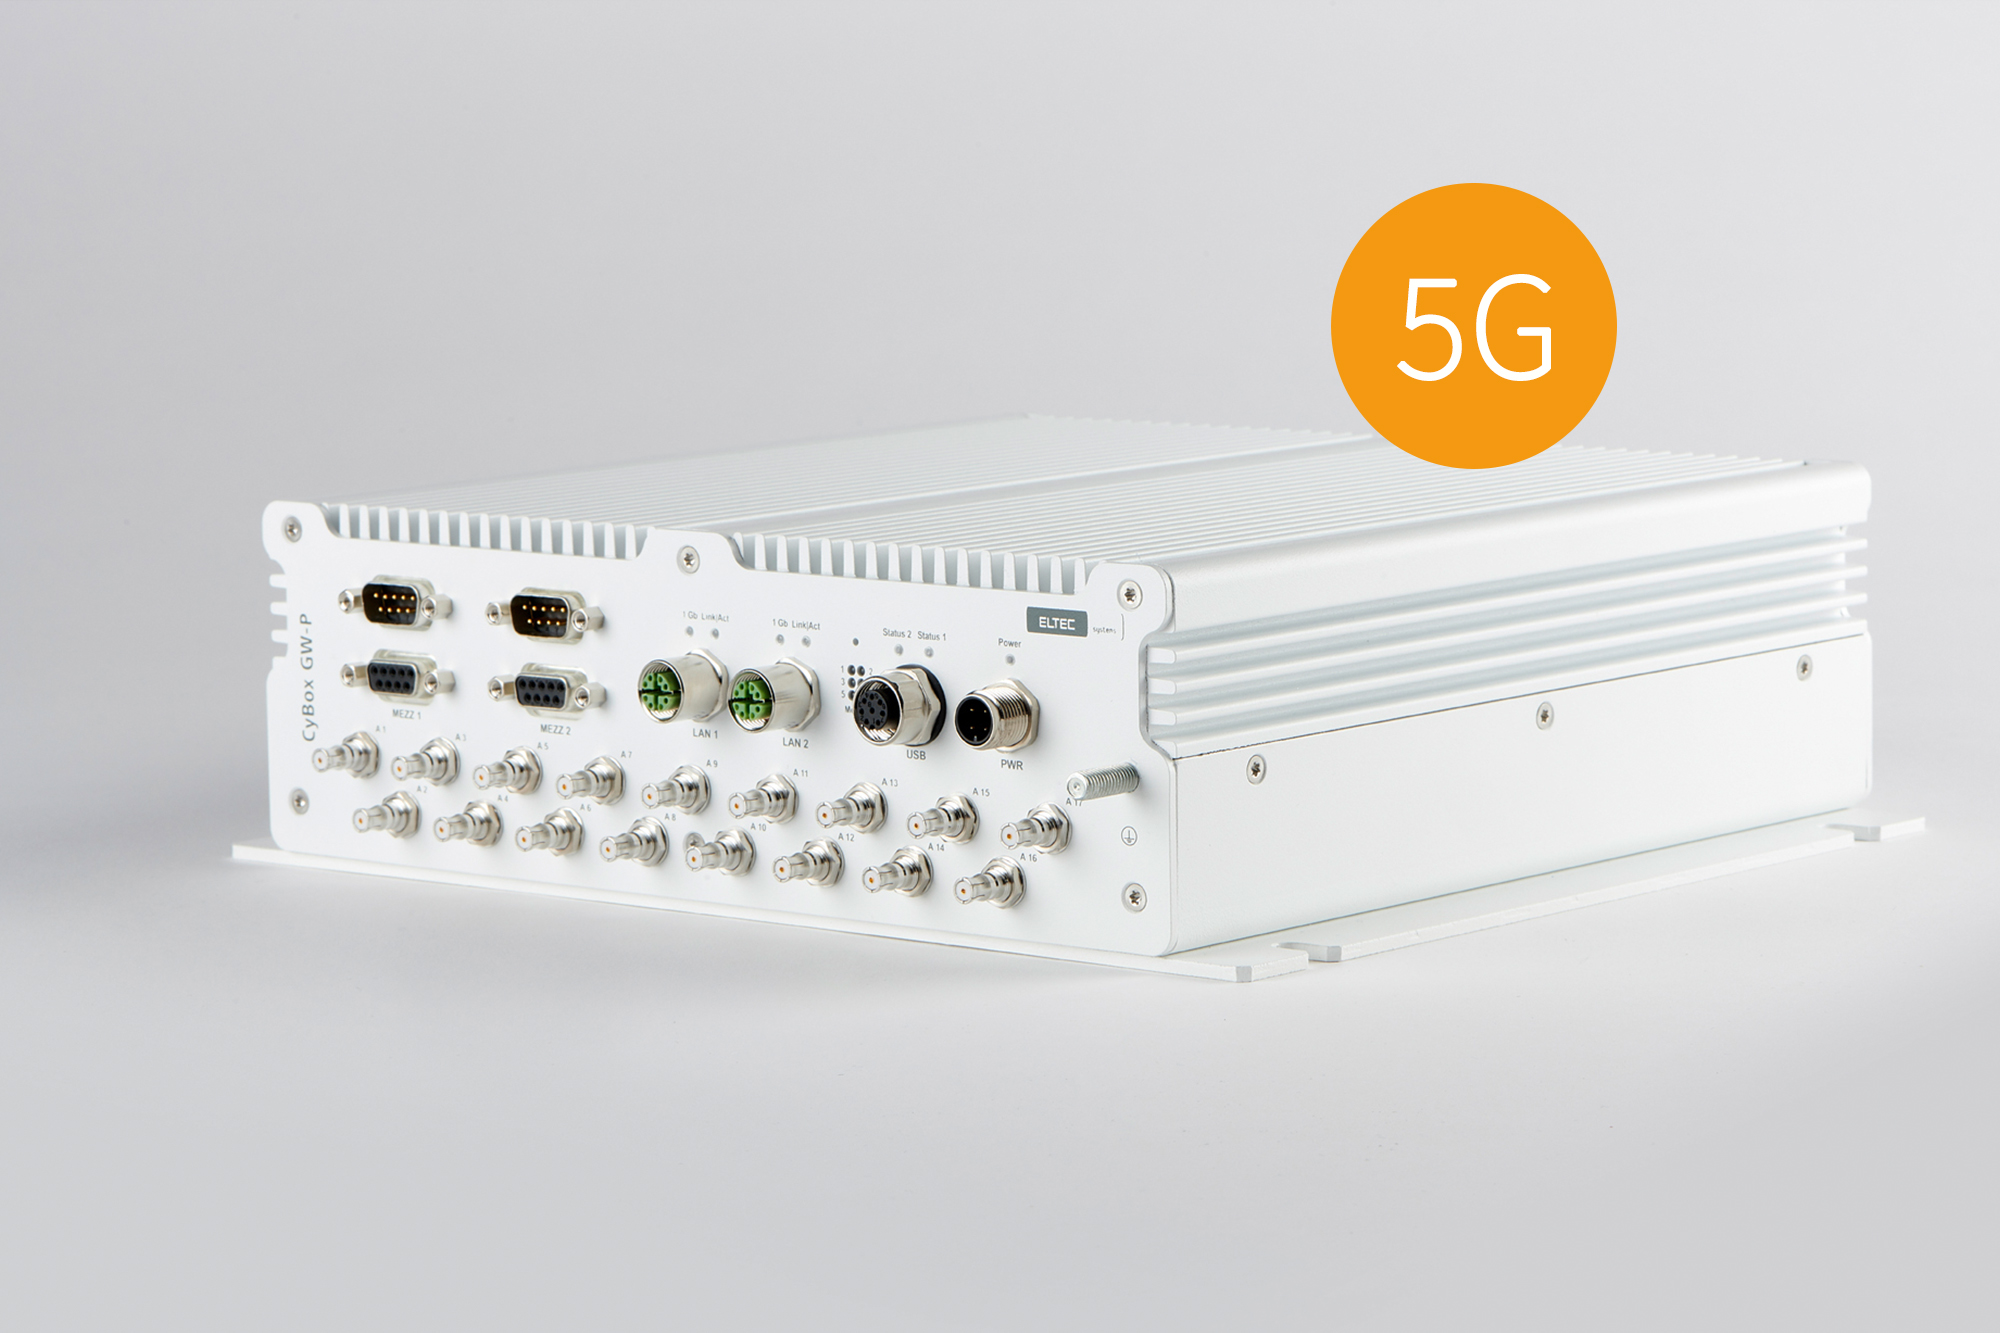 The wireless 5G gateway, CyBox GW 2-P, offers four slots for various 5G/LTE and Wi-Fi module combinations and an integrated SSD for storing media content